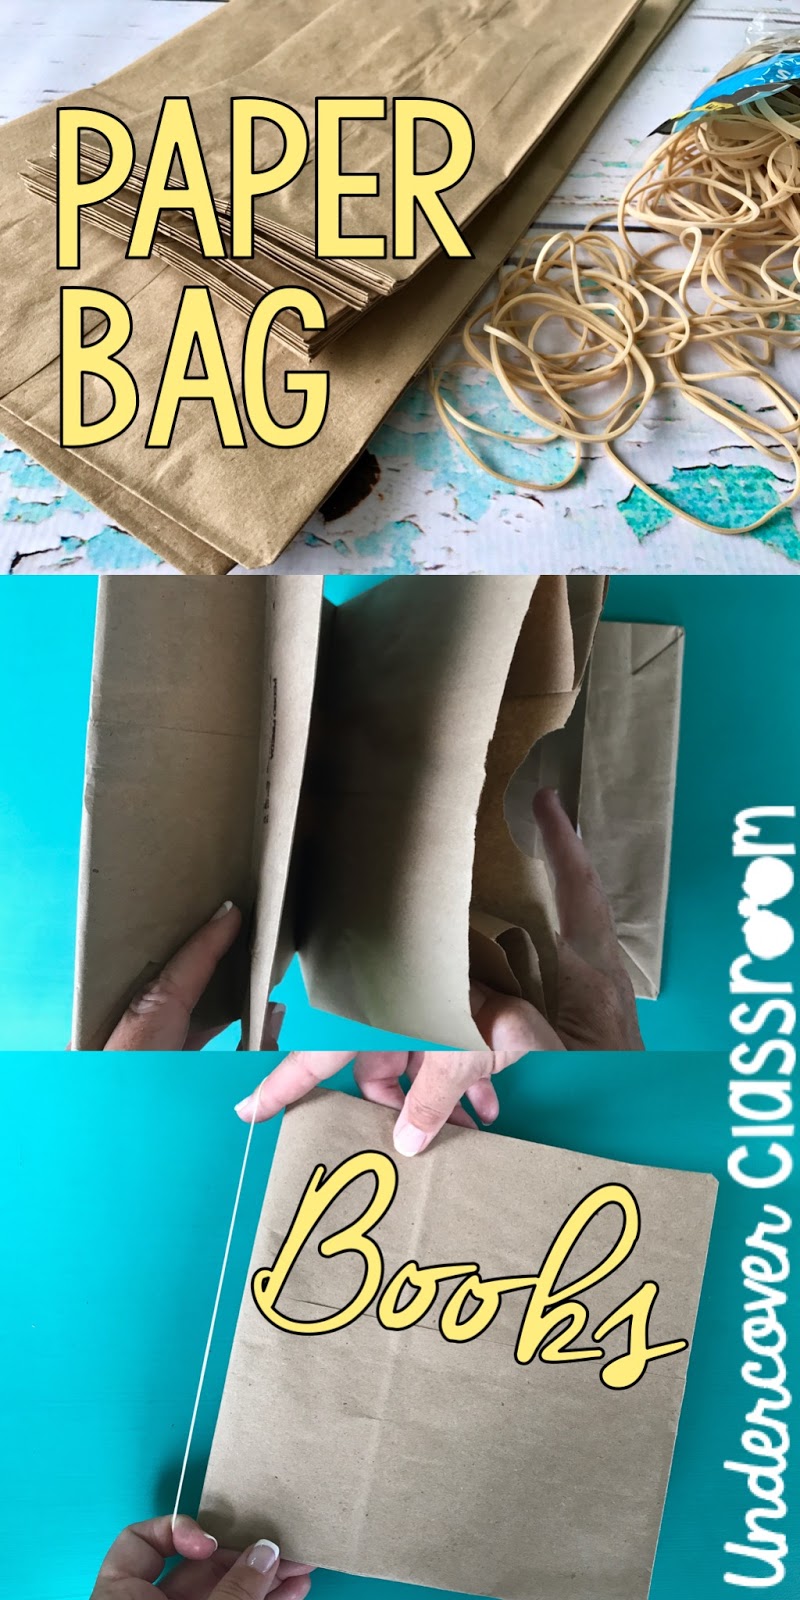 Learn how to make a paper bag book for your classroom with just two bags and a rubber band. Bag books are foldable teaching tools that will motivate your students.